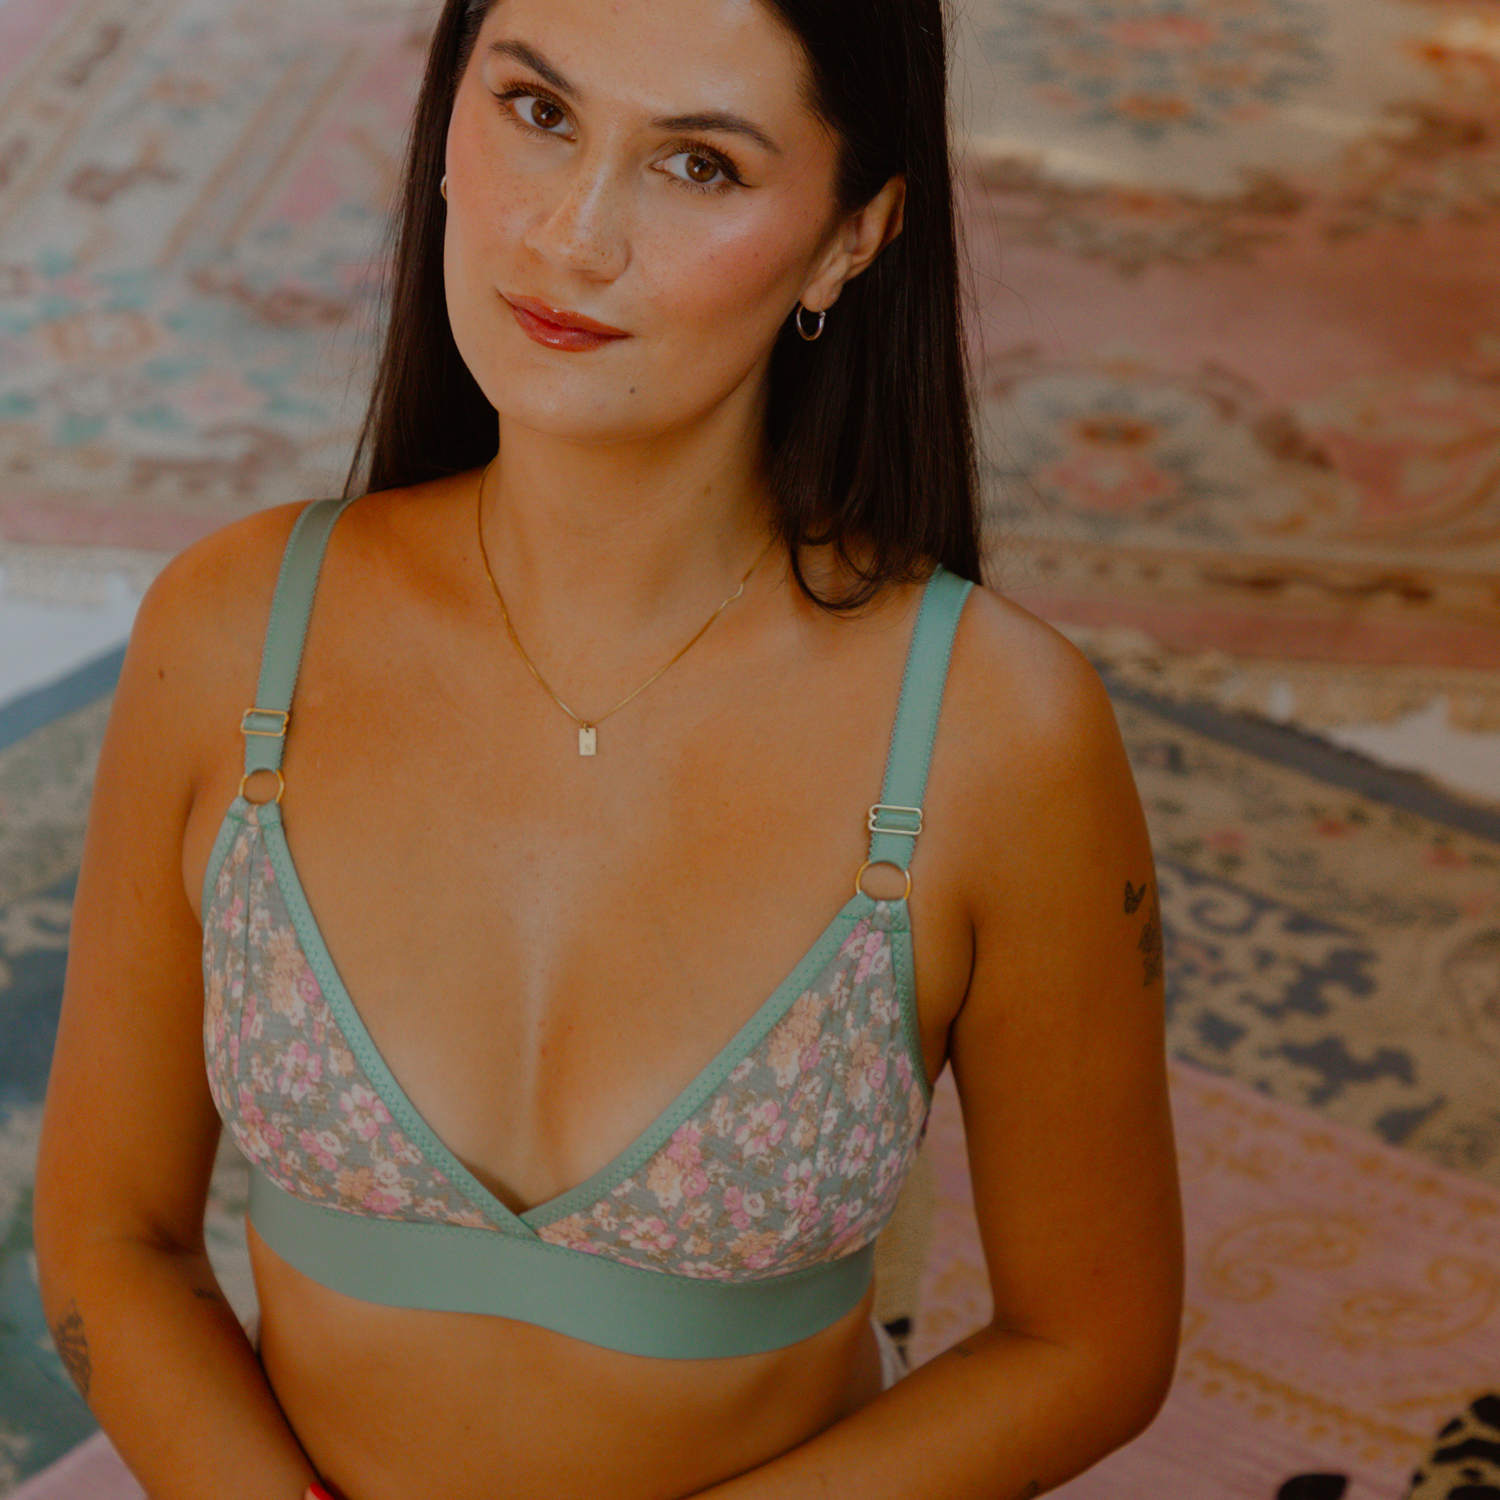 Barrett Bralette Sewing Kit: Lingerie Pattern to Sew at Home by Madalynne